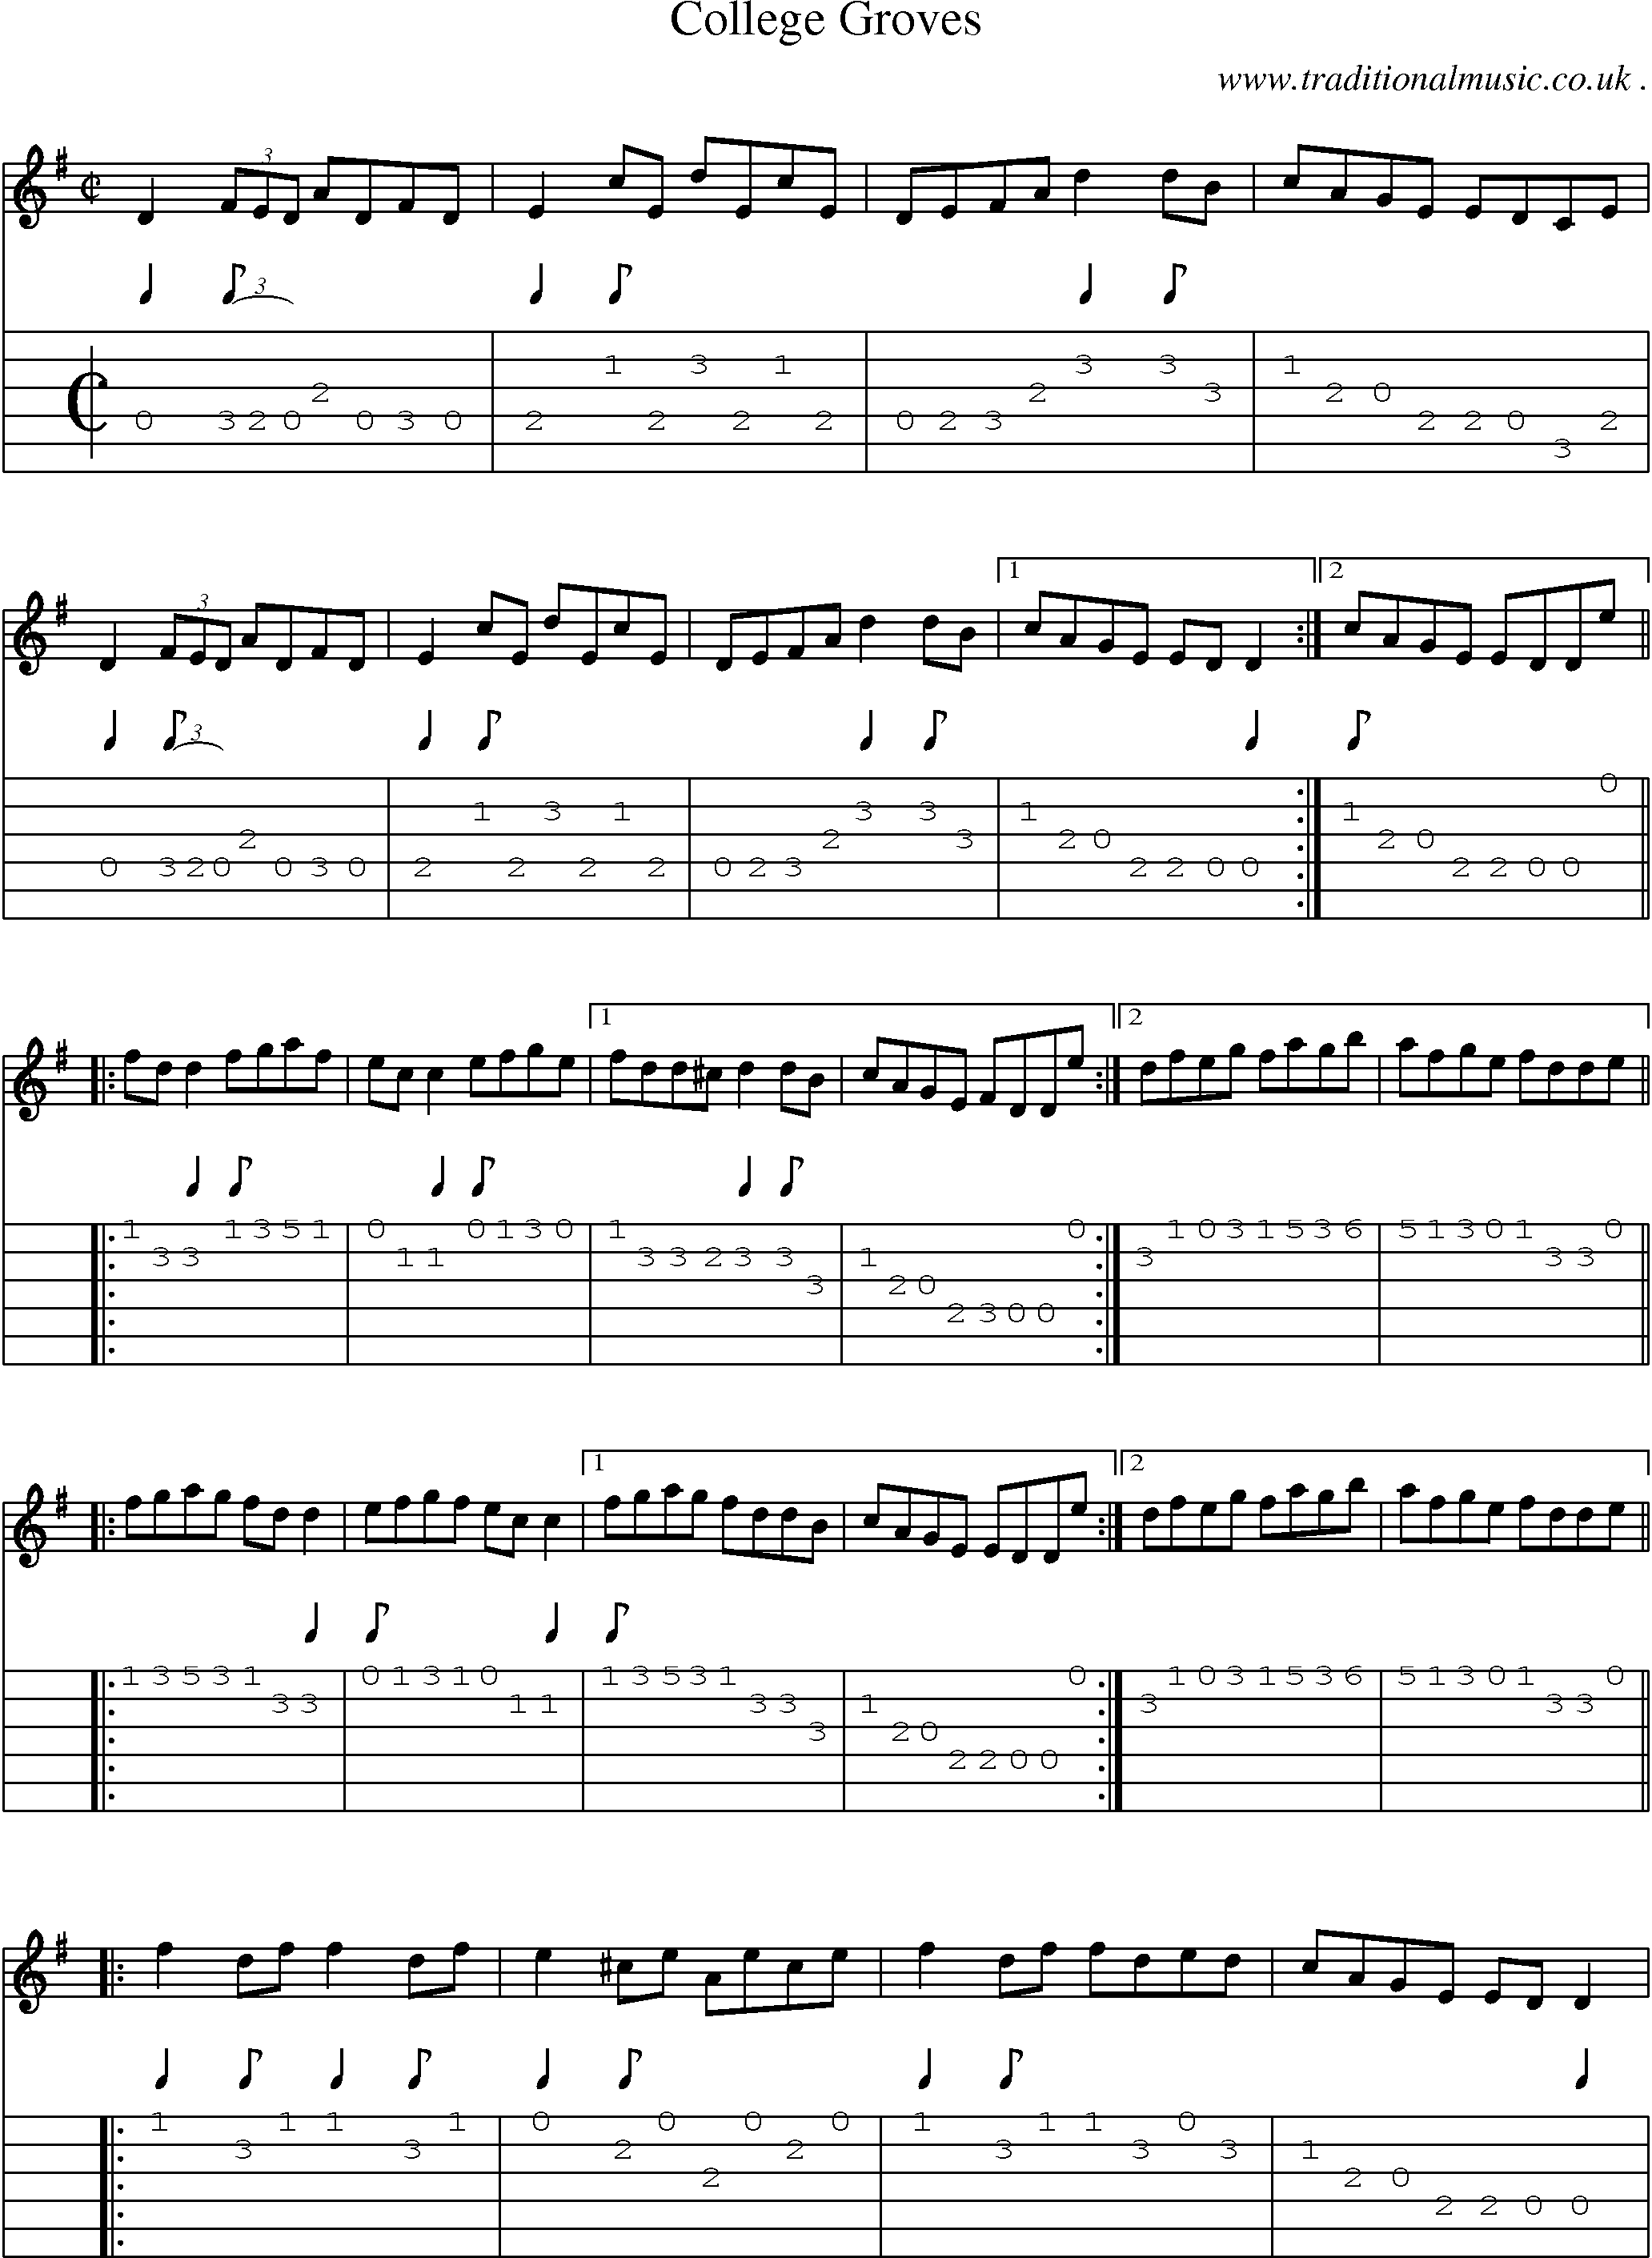 Sheet-Music and Guitar Tabs for College Groves